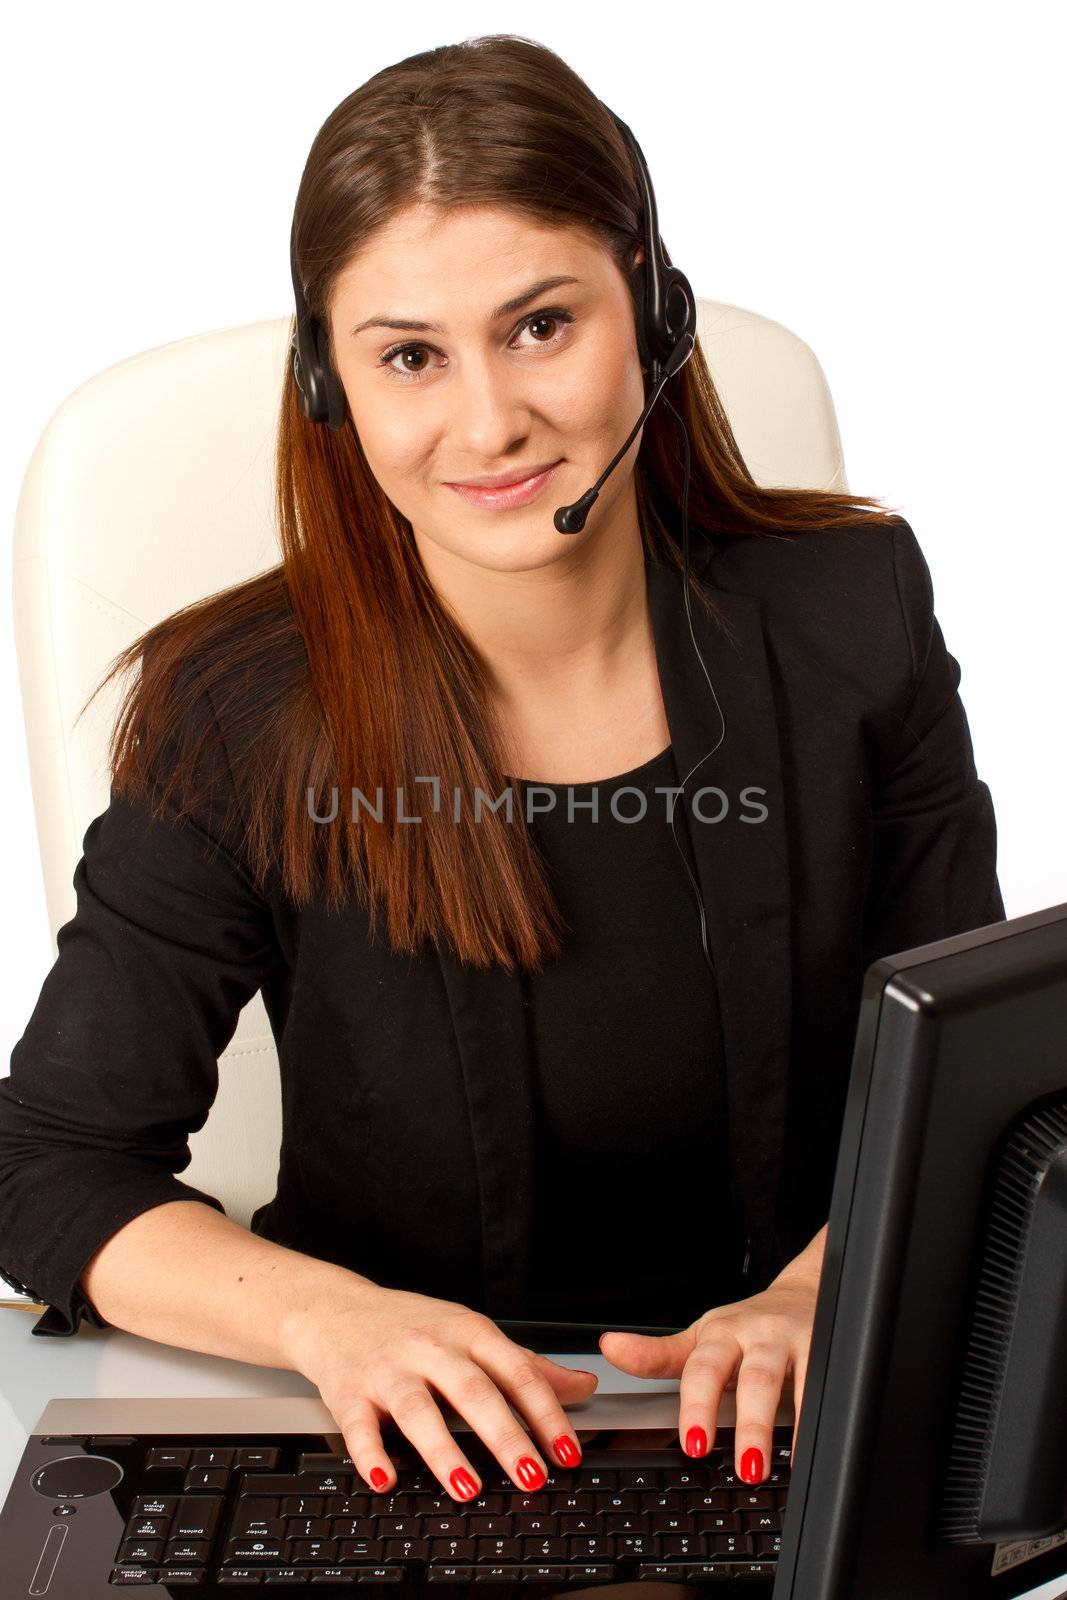 Office worker, secretary at her desk working on a computer